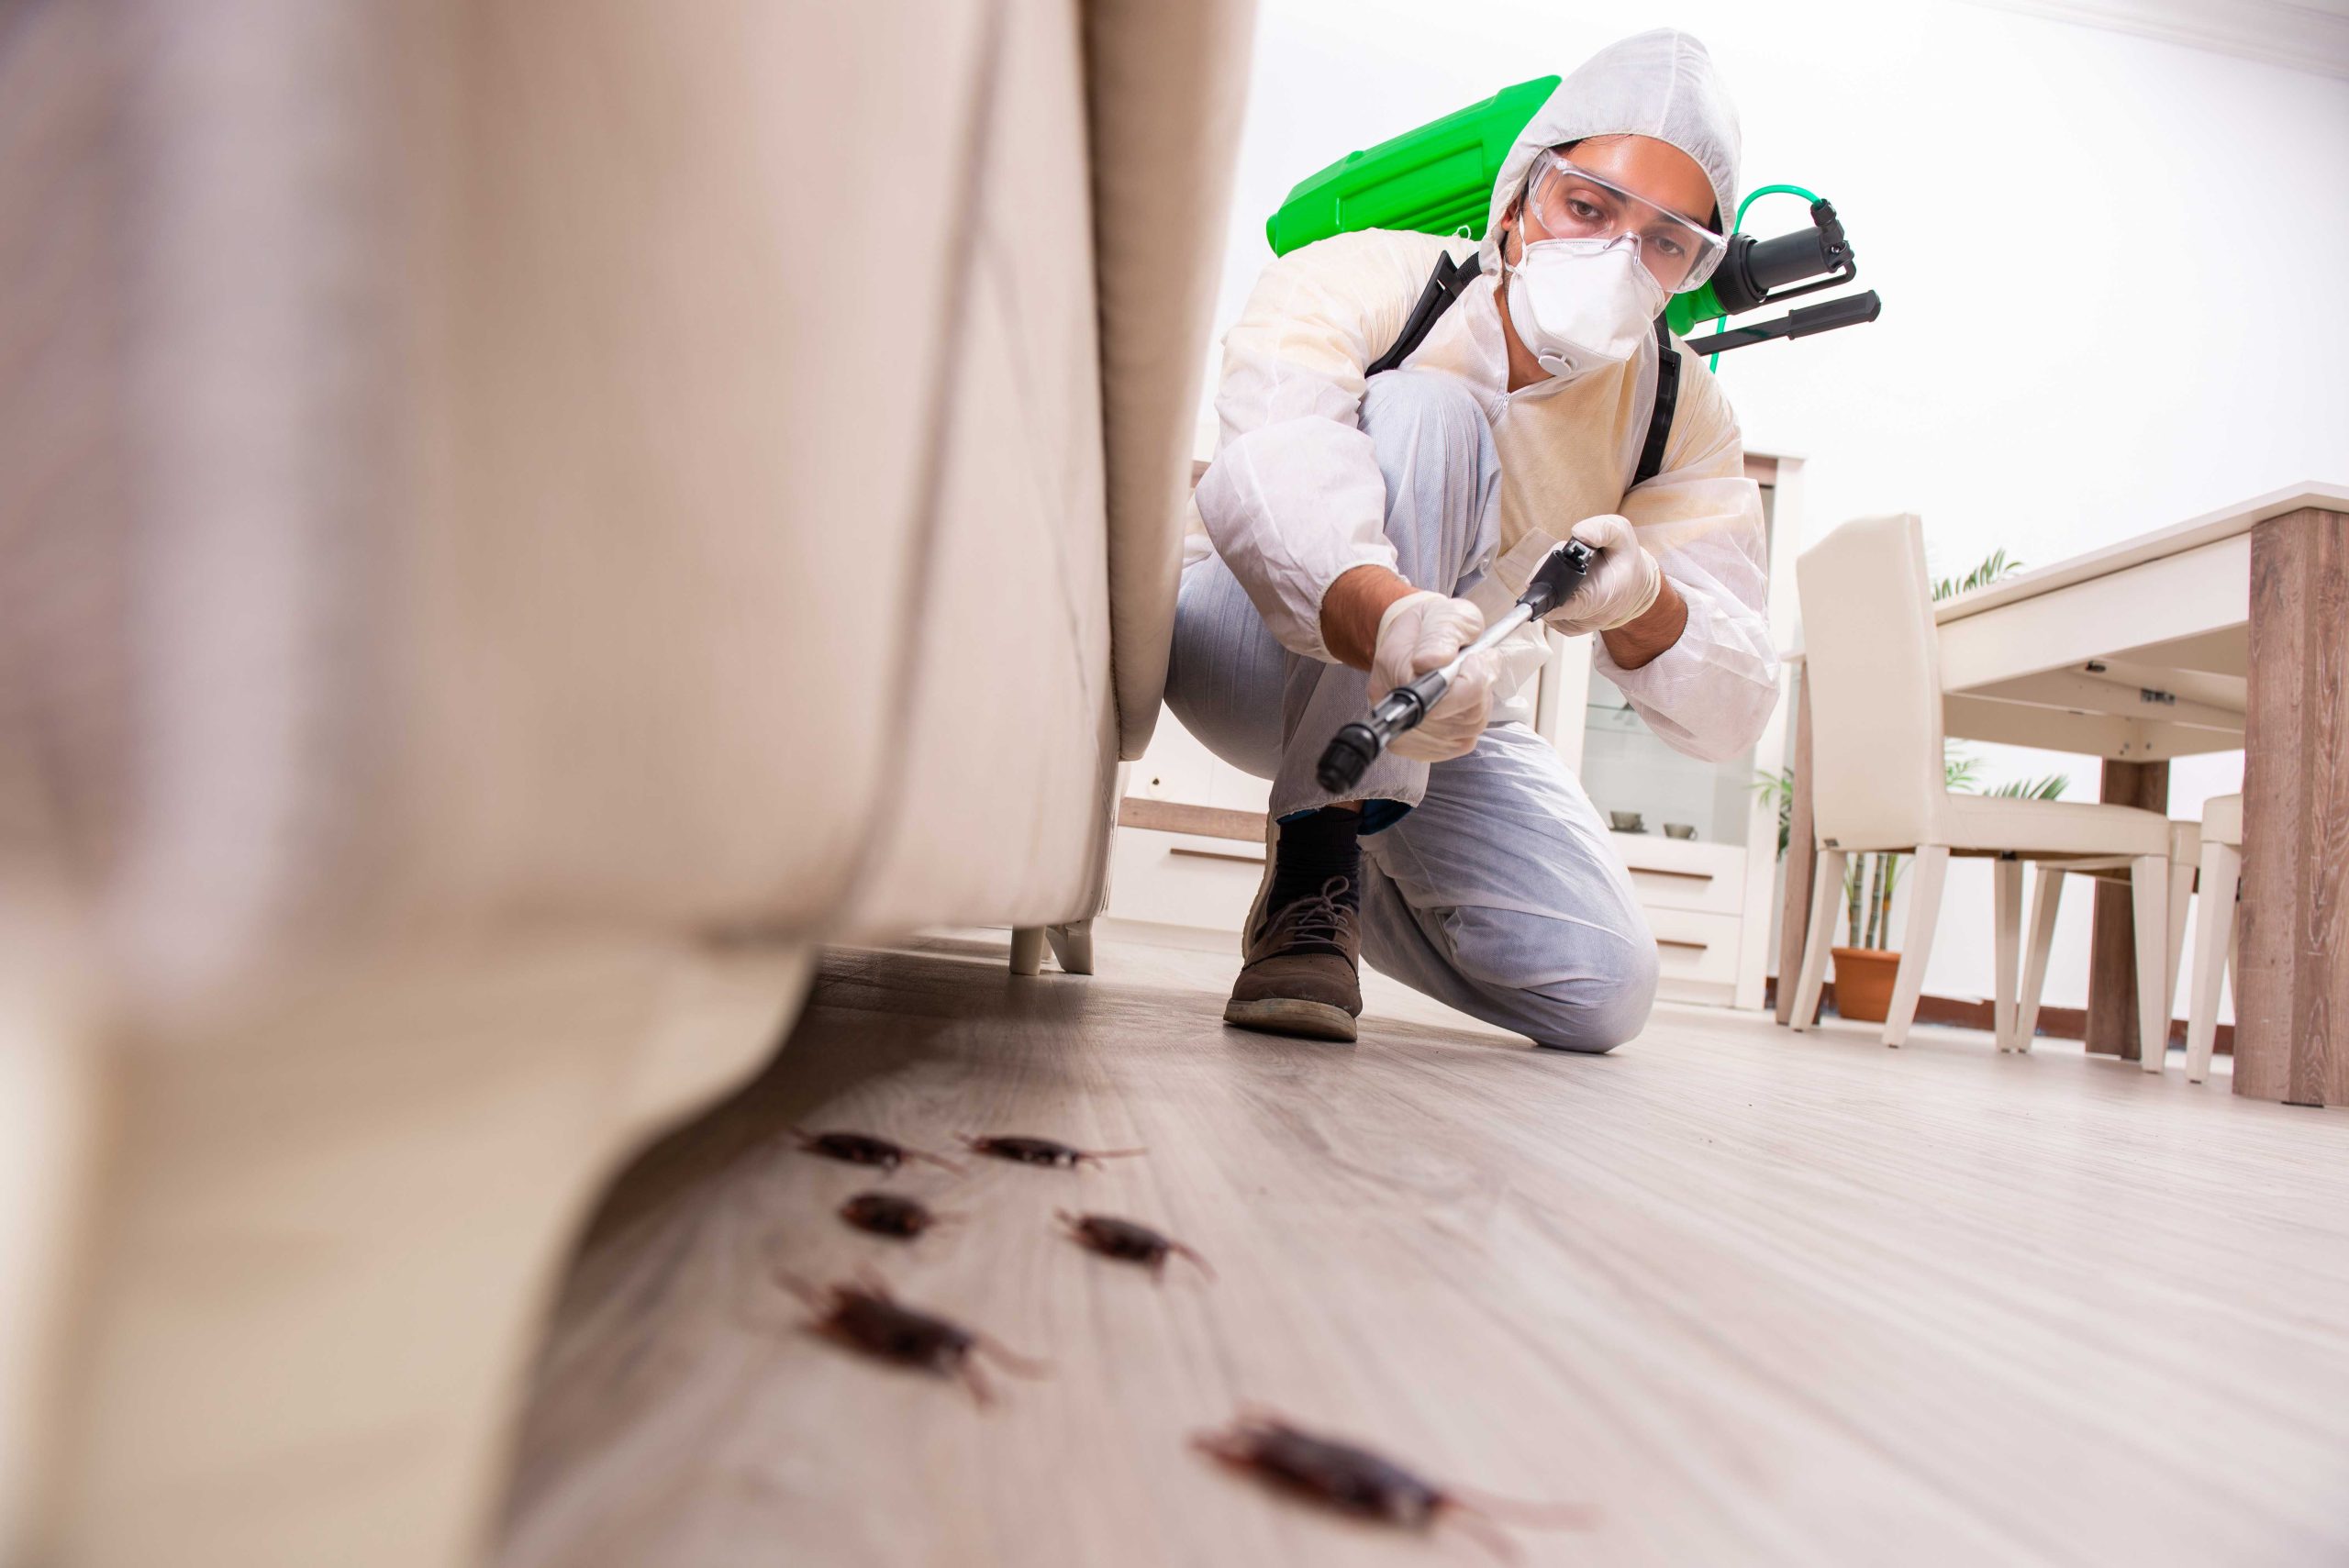 Pest-Control experts in Long Island specializing in prevention and eradication of various pests. Don't let pests damage your property and endanger your health.